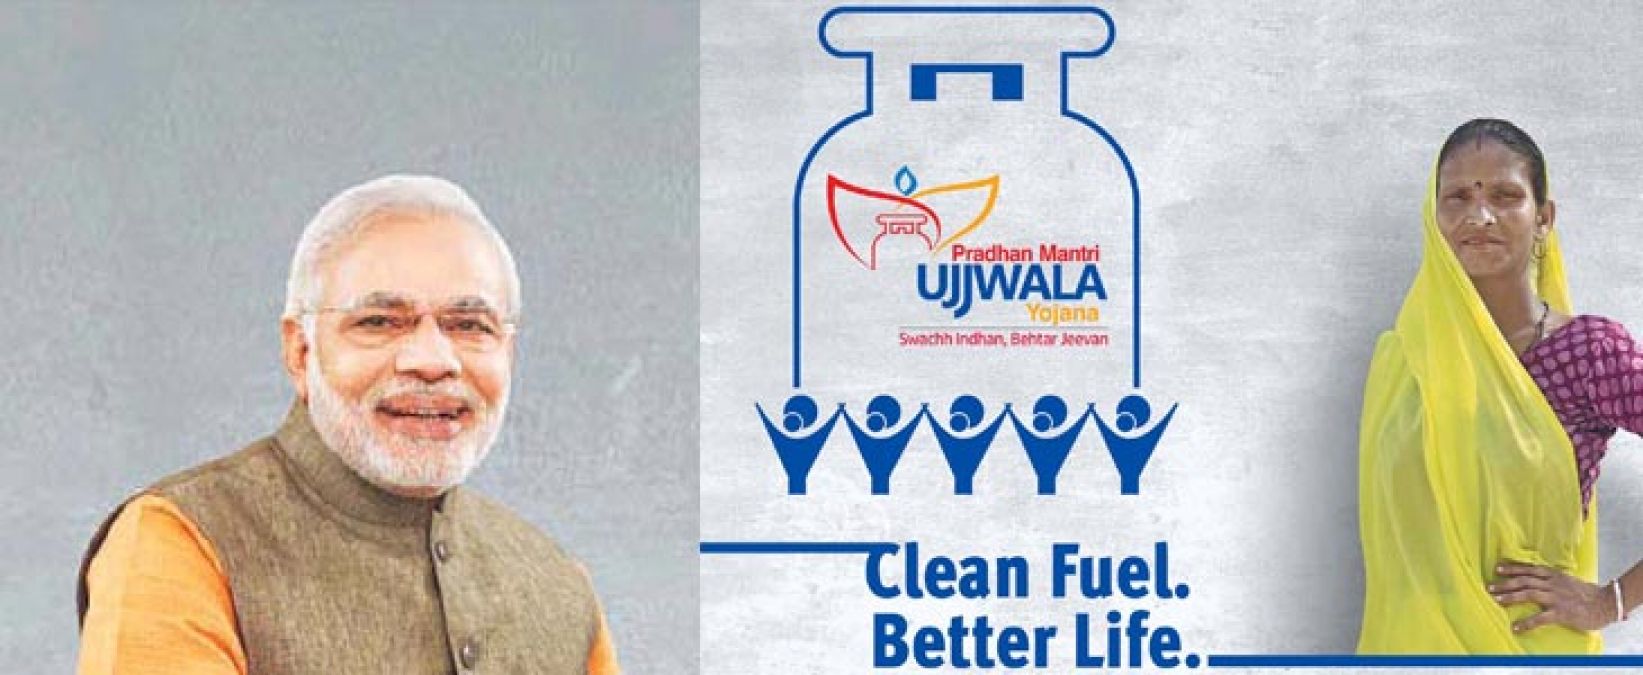 Ujjwala Scheme: Eight millionth beneficiary Ayesha Sheikh said this on getting new gas connection